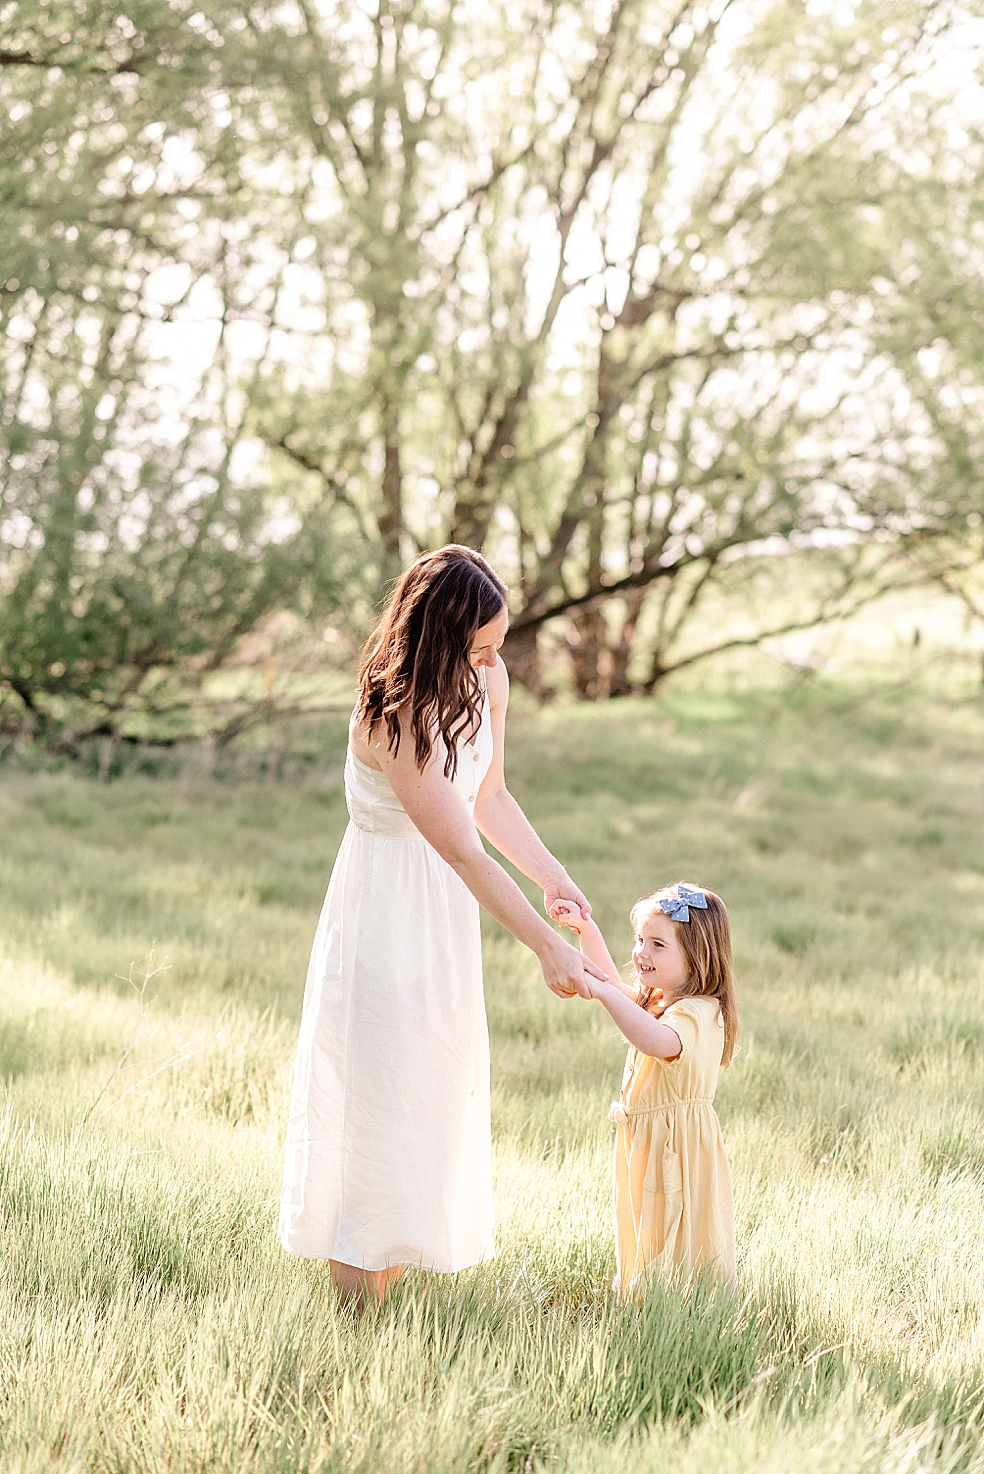 Mom and daughter dancing in a field | Photo by Jessica Lee Photography